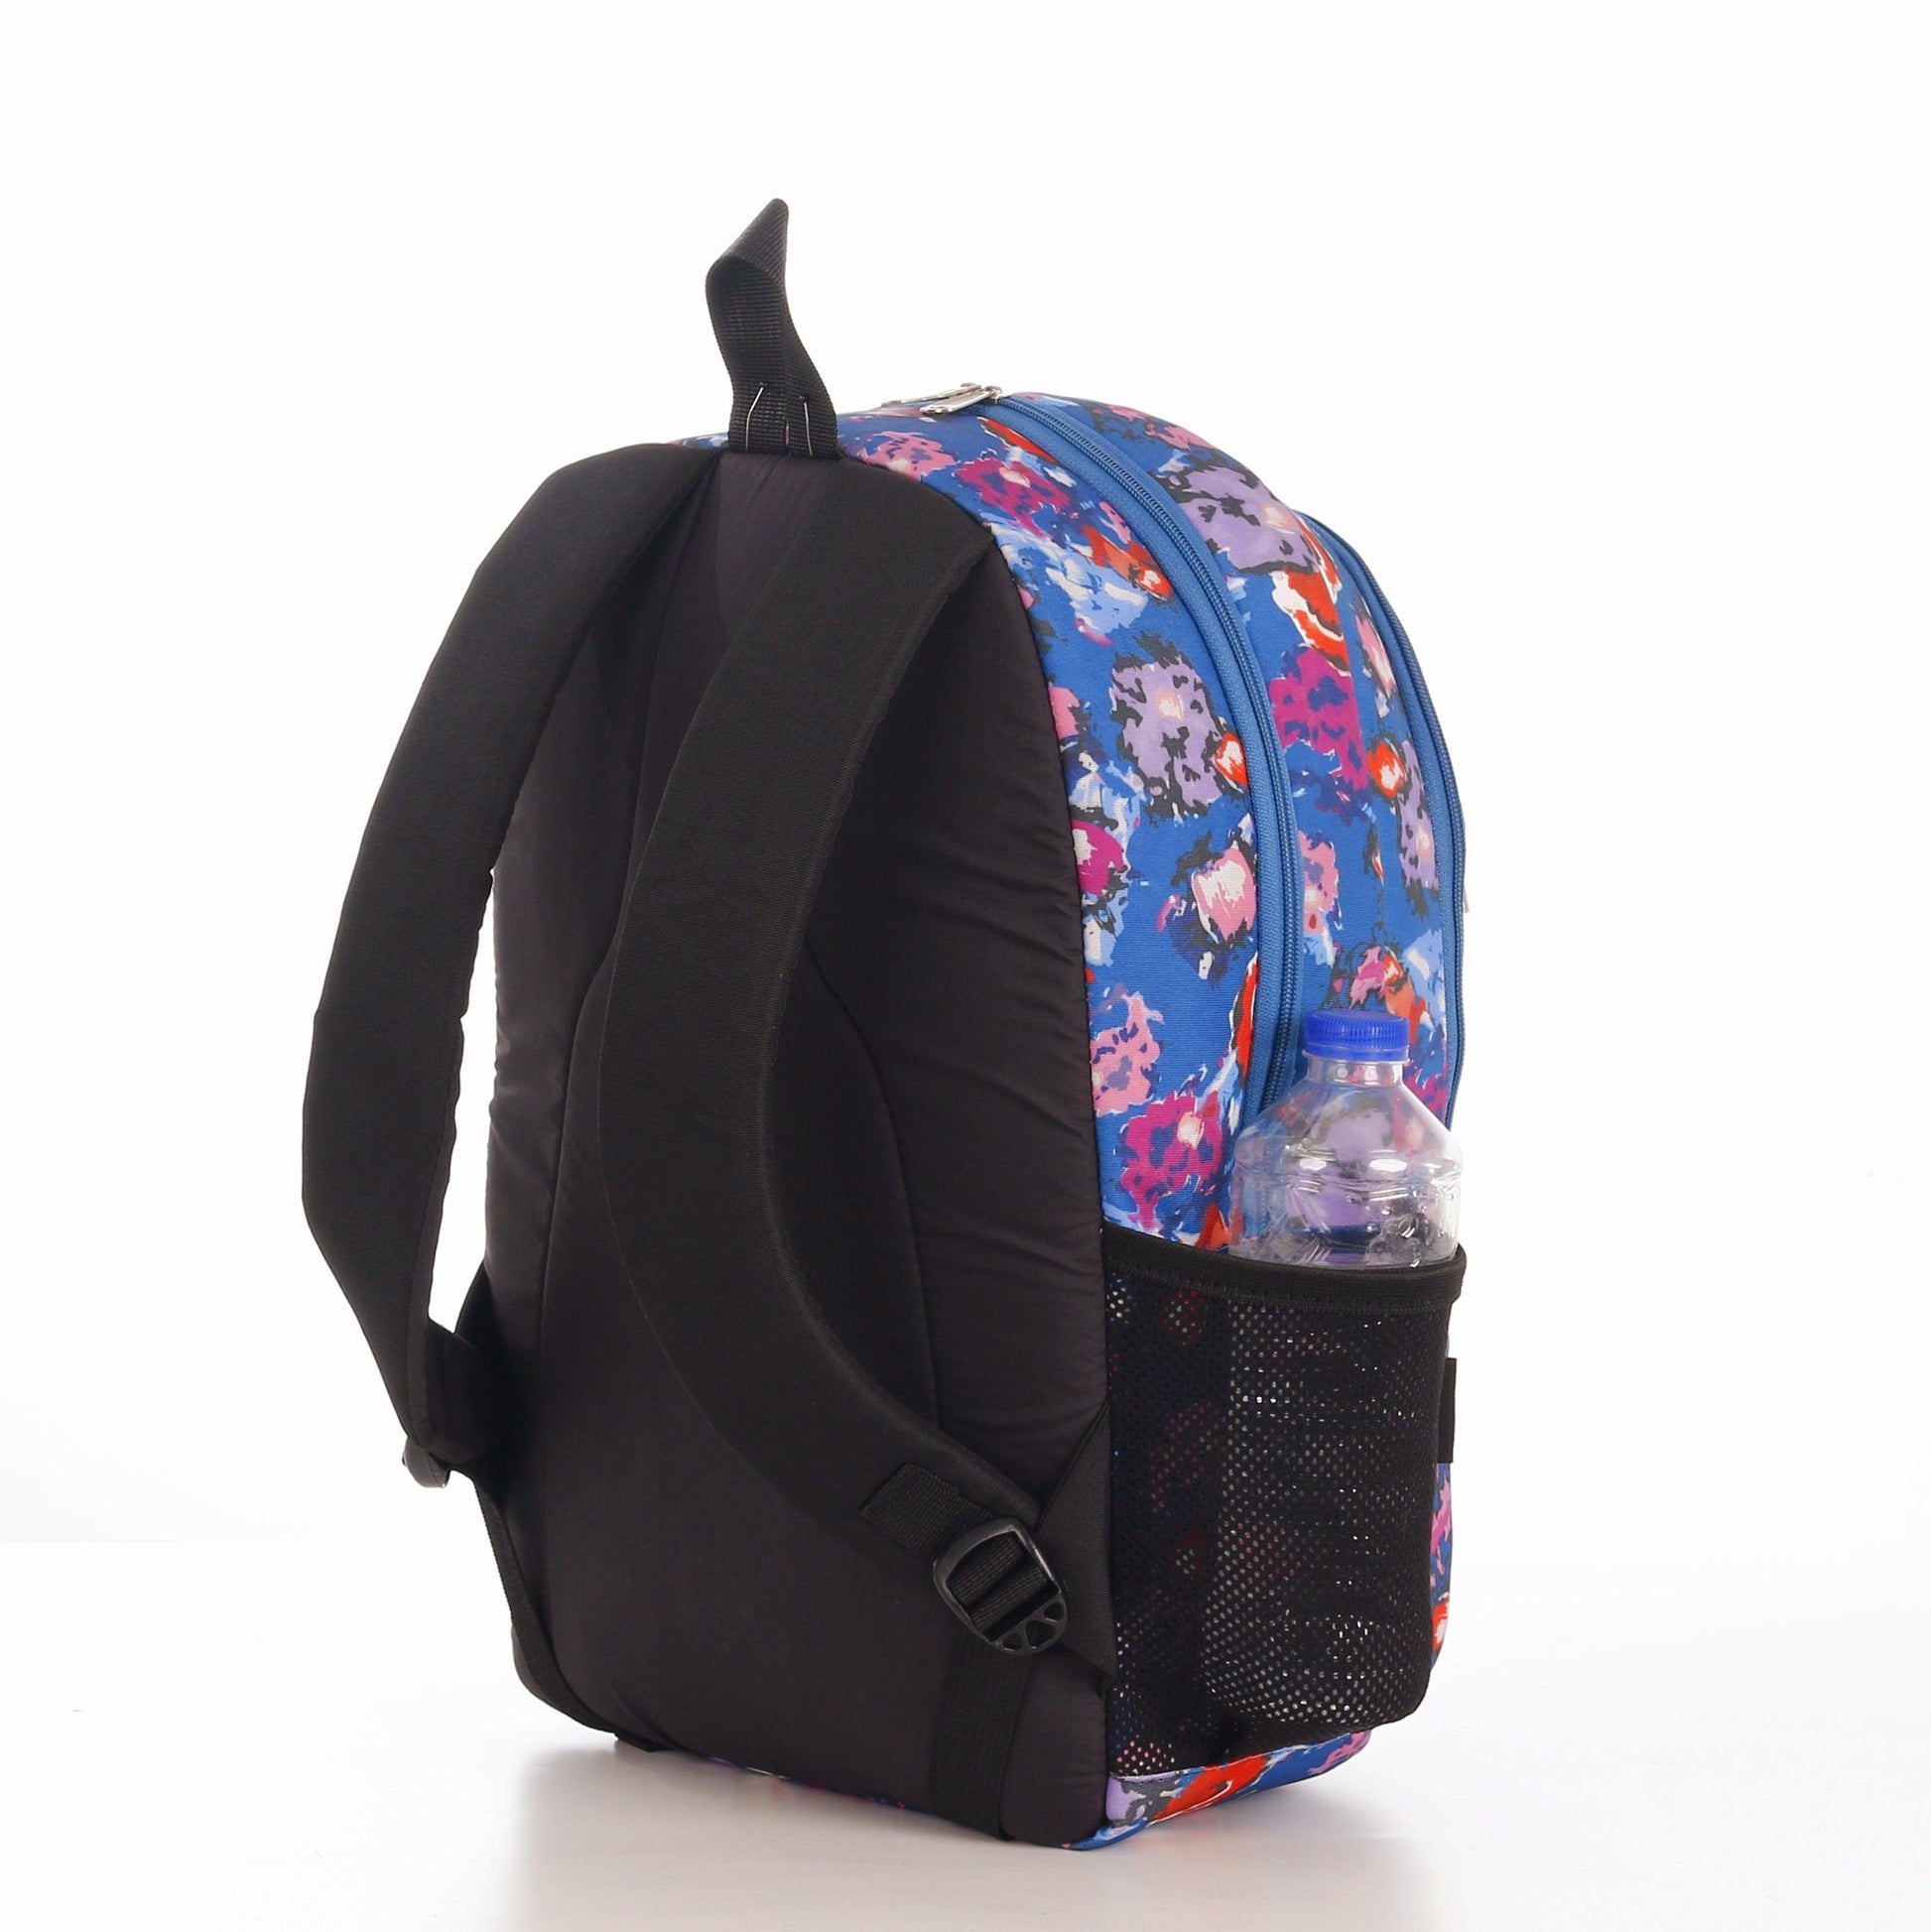 Force Backpack Unisex -blue & color pattern - new edition - FNE-011 - FORCE STORES